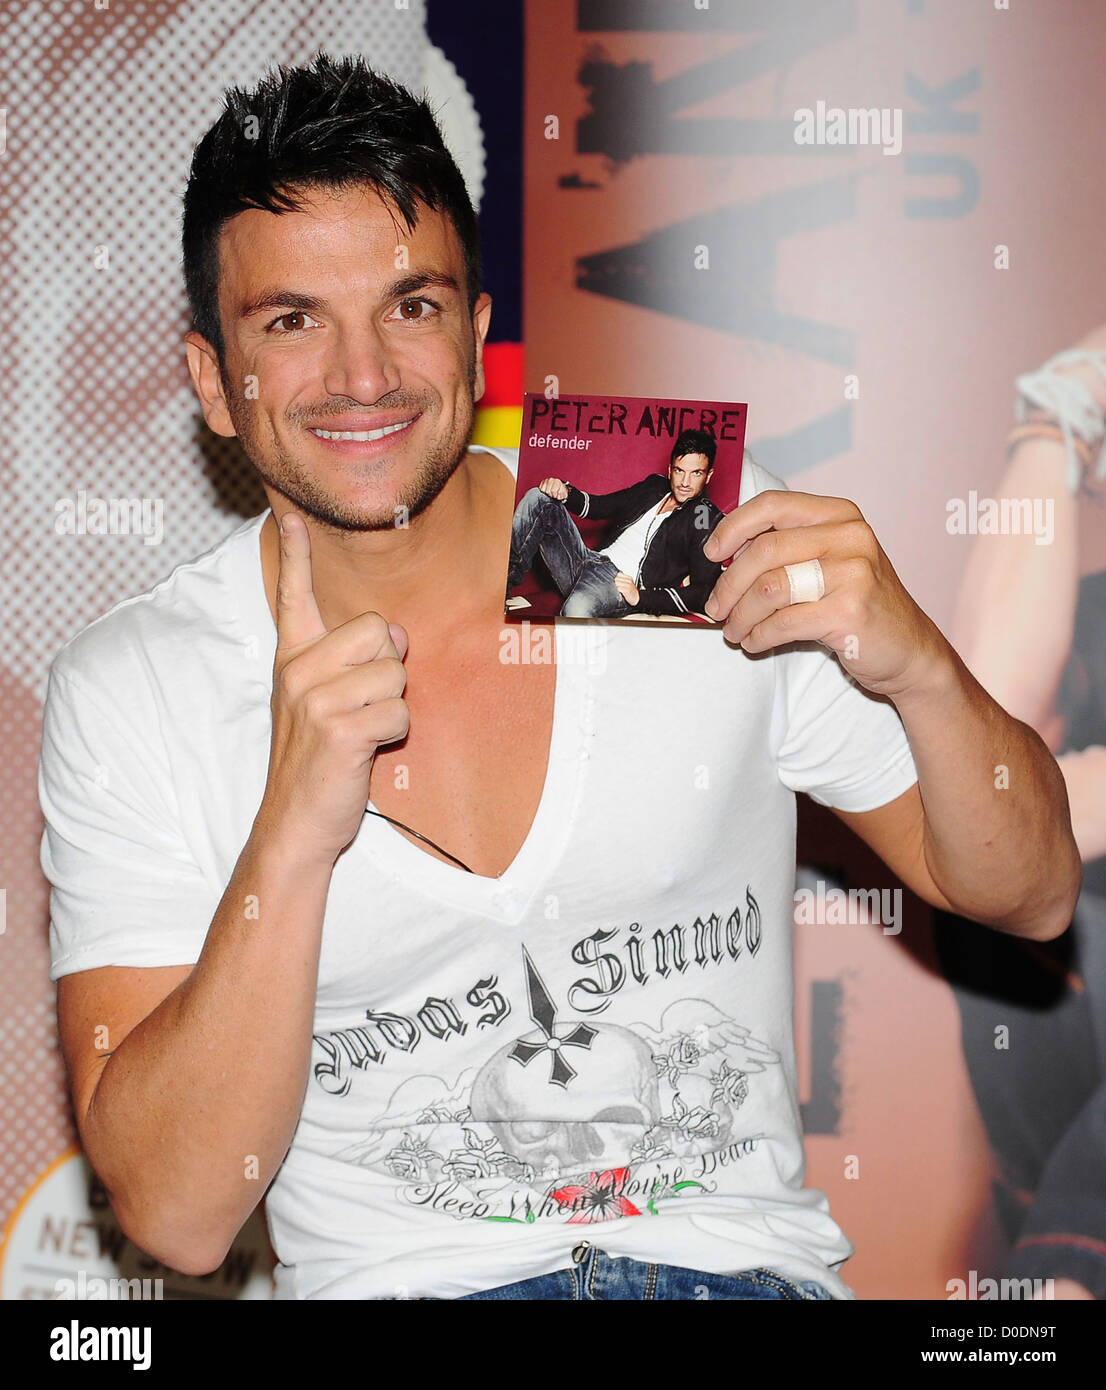 Peter Andre promoting his new single 'Defender' at Asda London, England - 26.10.10 Stock Photo